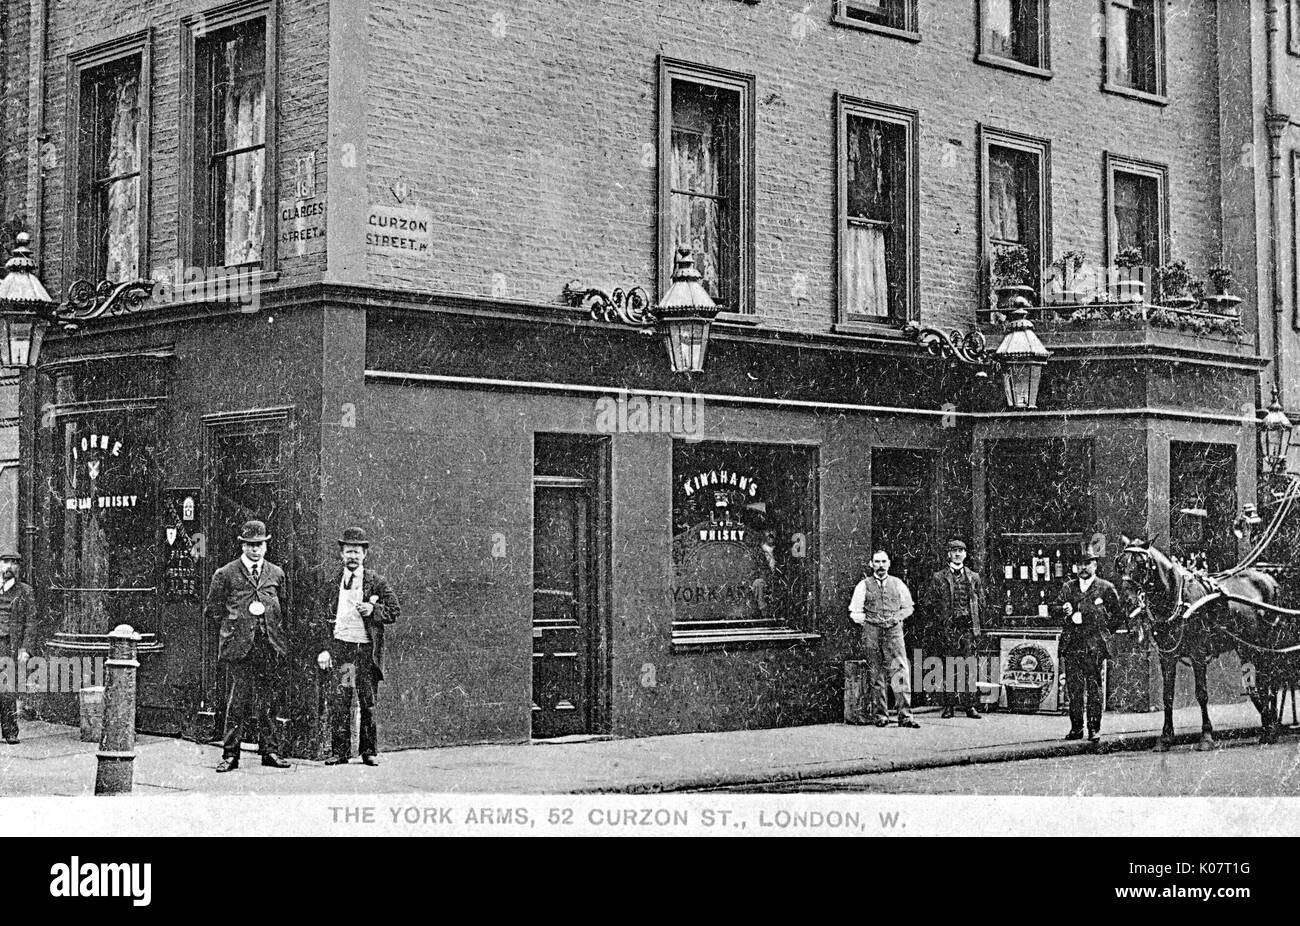 View of The York Arms pub, Curzon Street, London Stock Photo